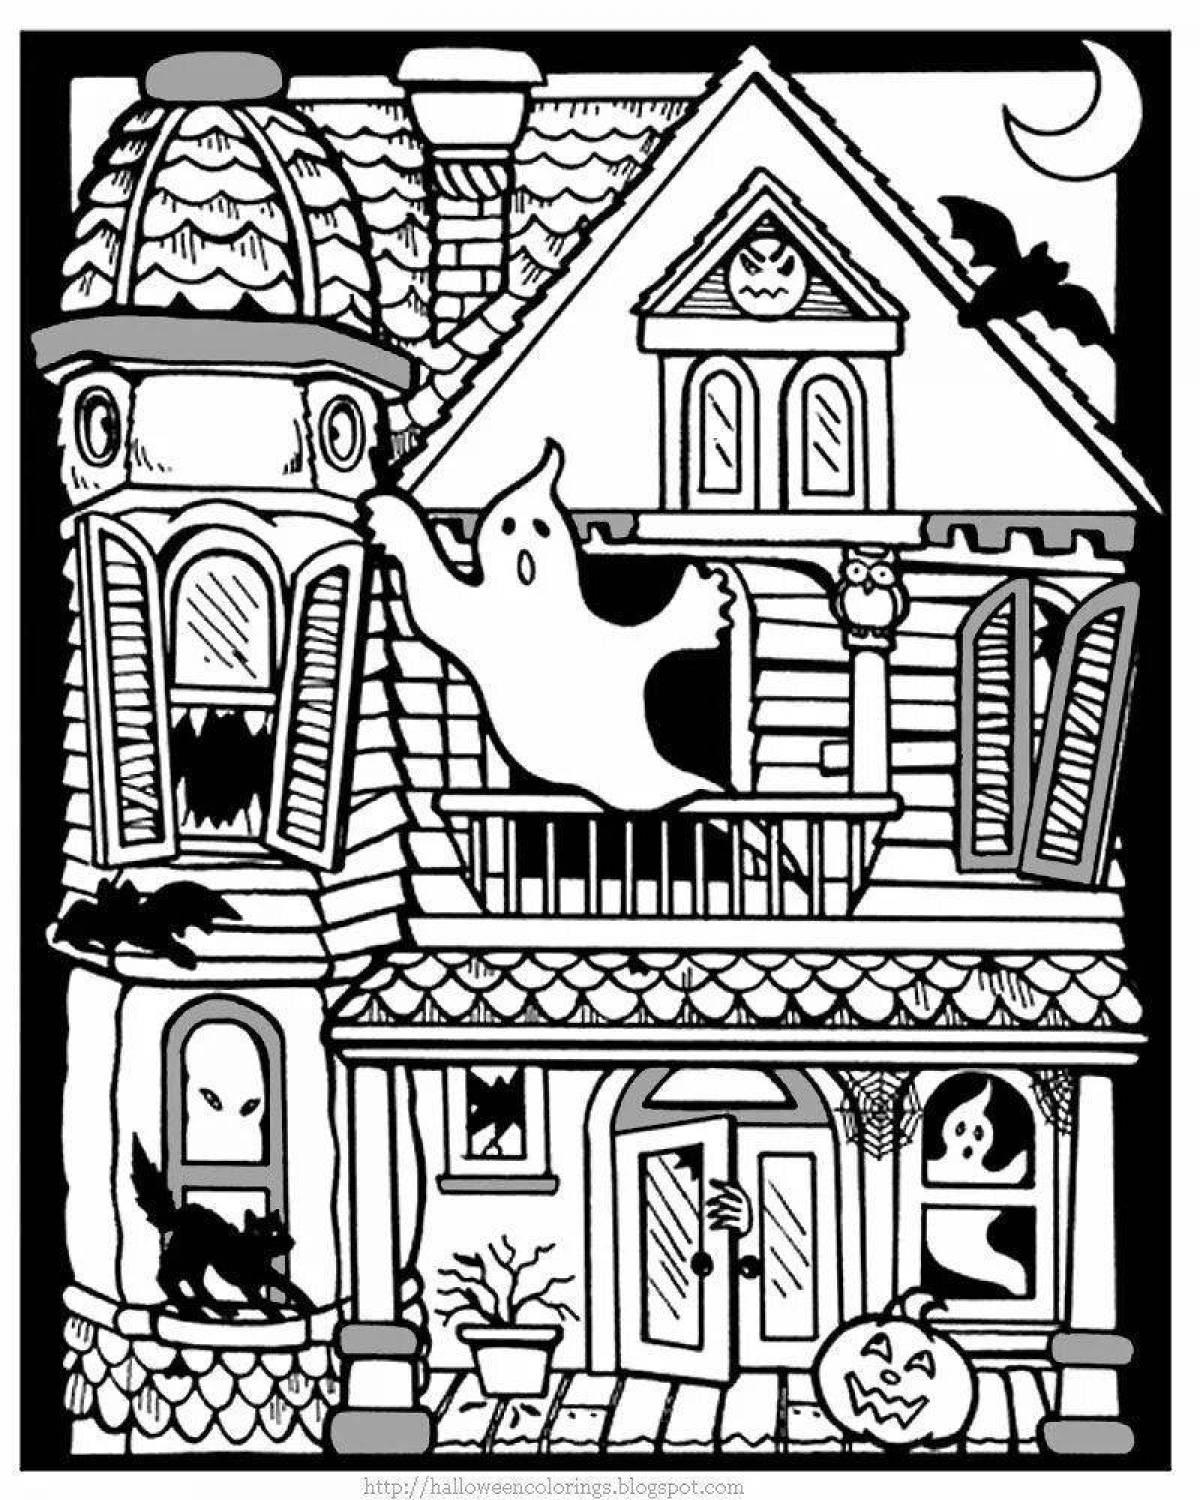 Spooky halloween house coloring page